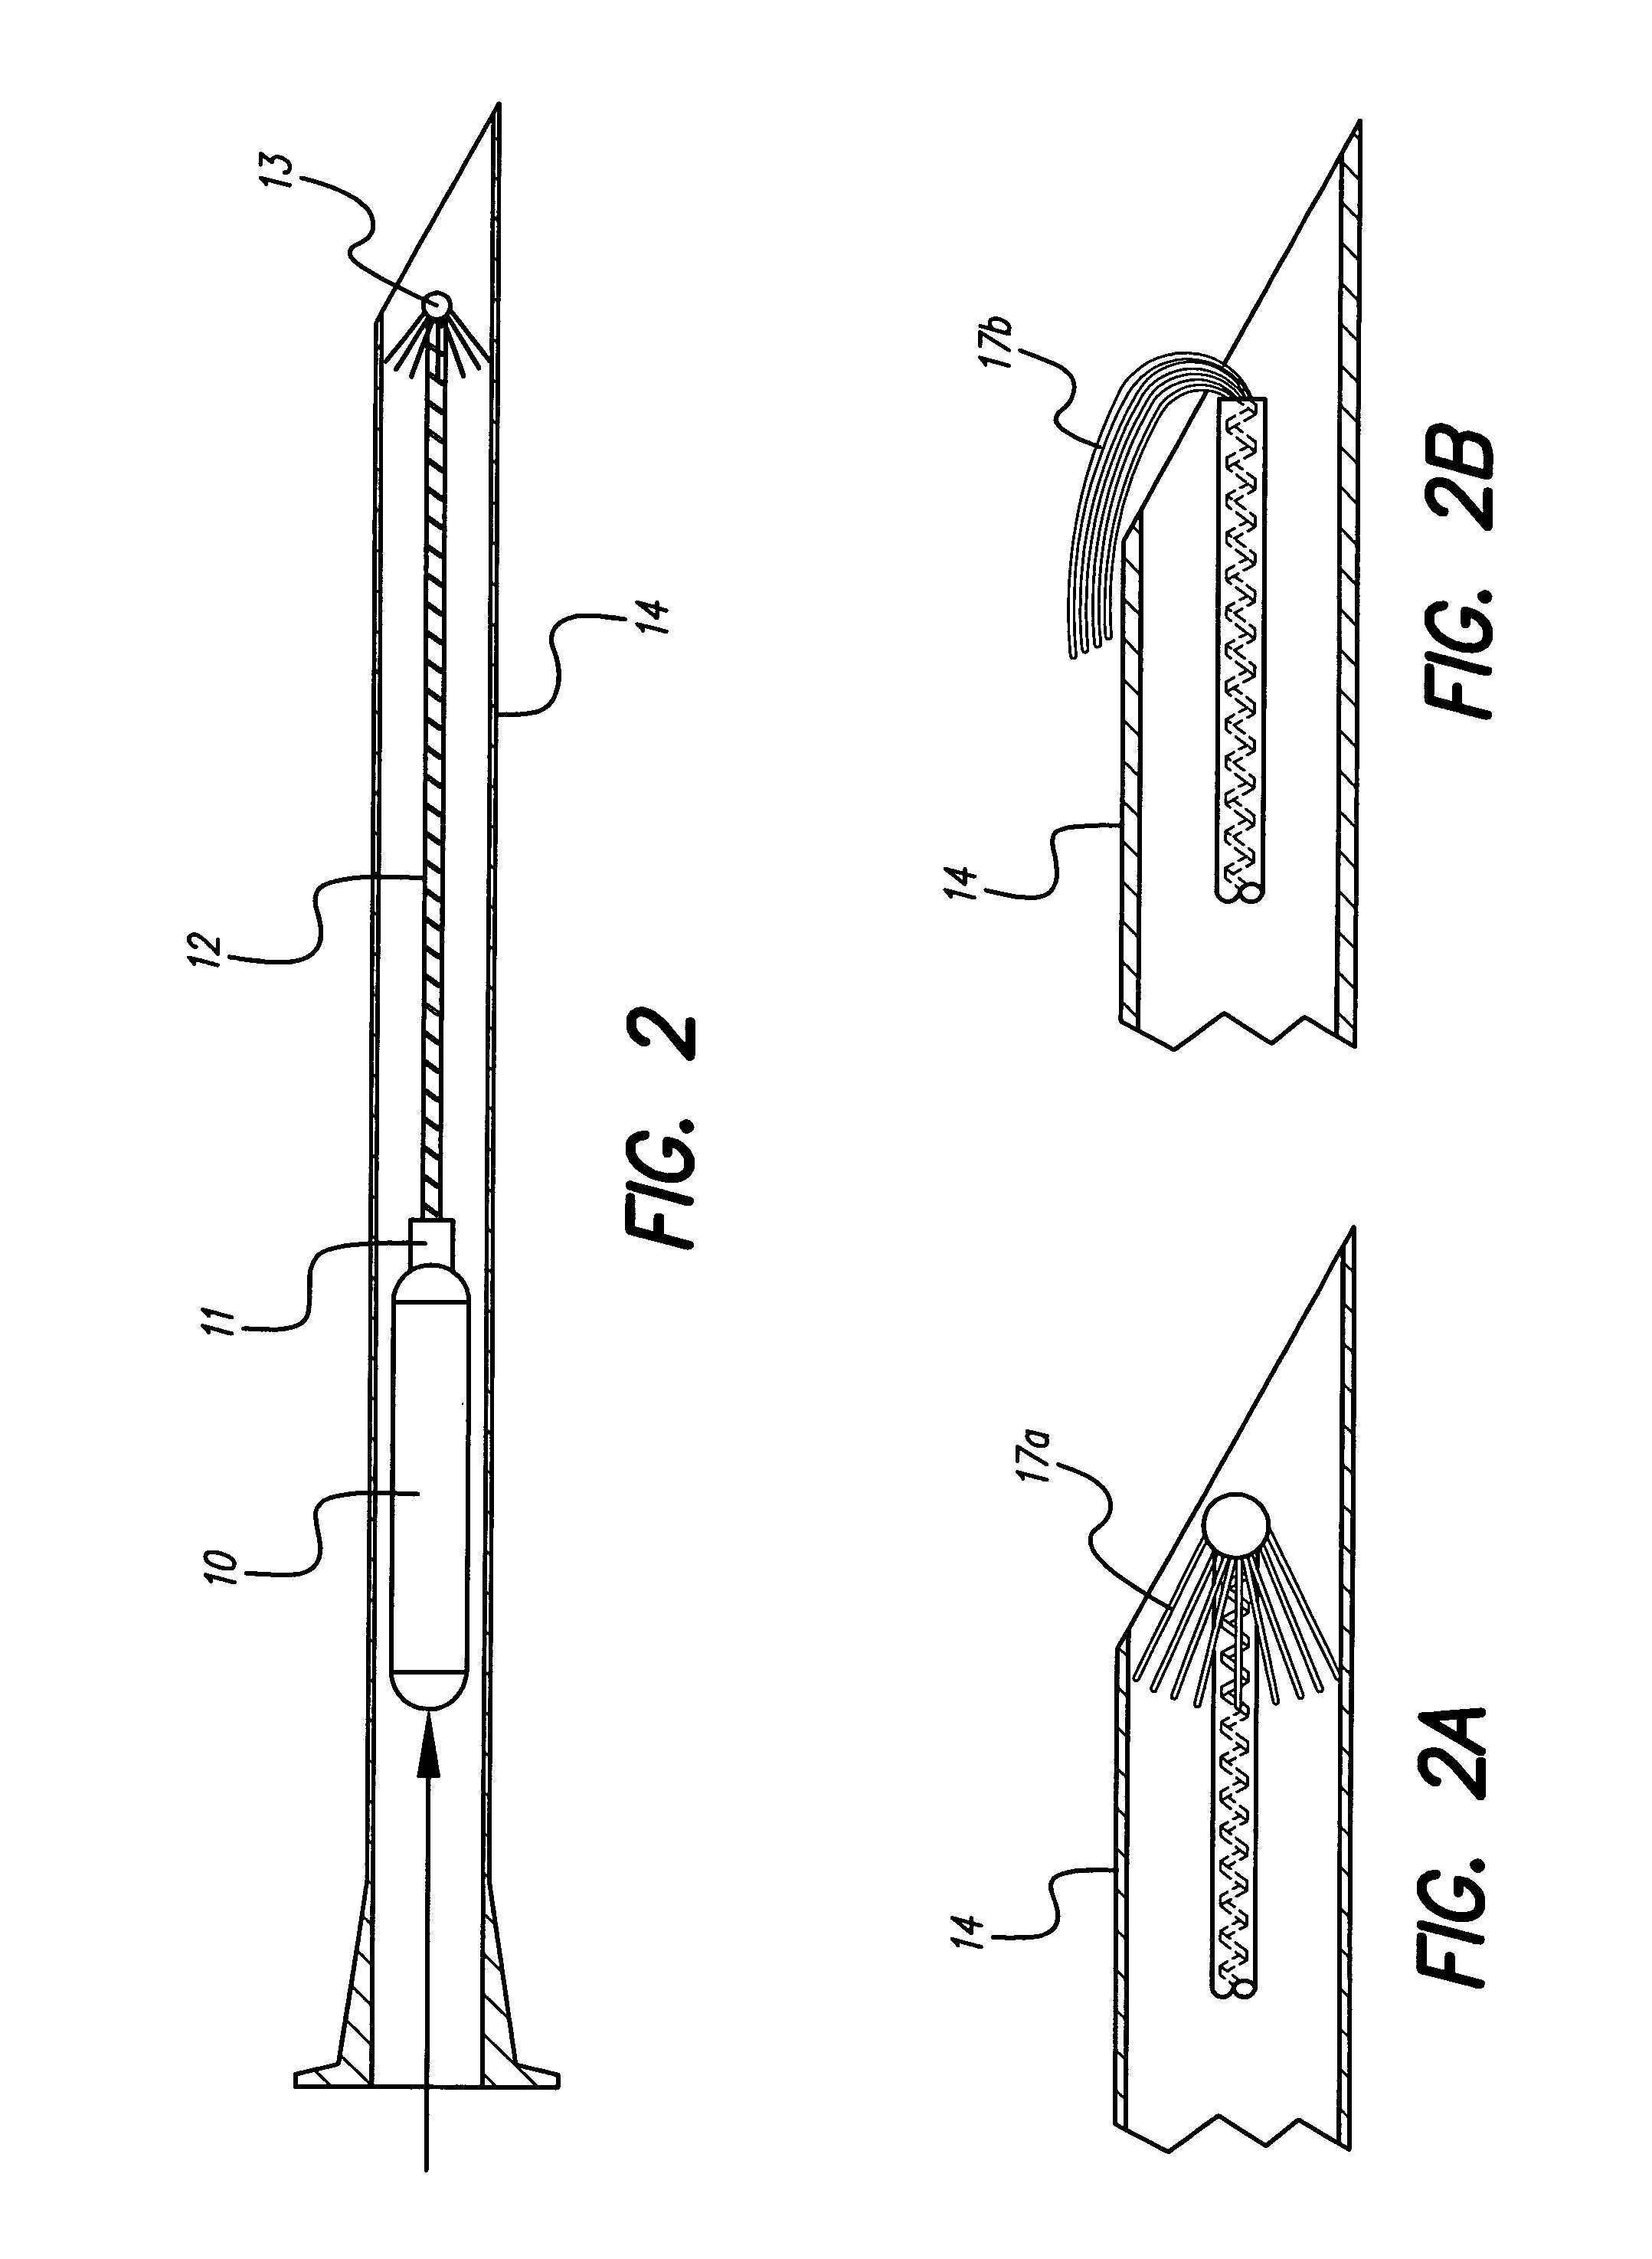 Implantable microdevice with extended lead and remote electrode